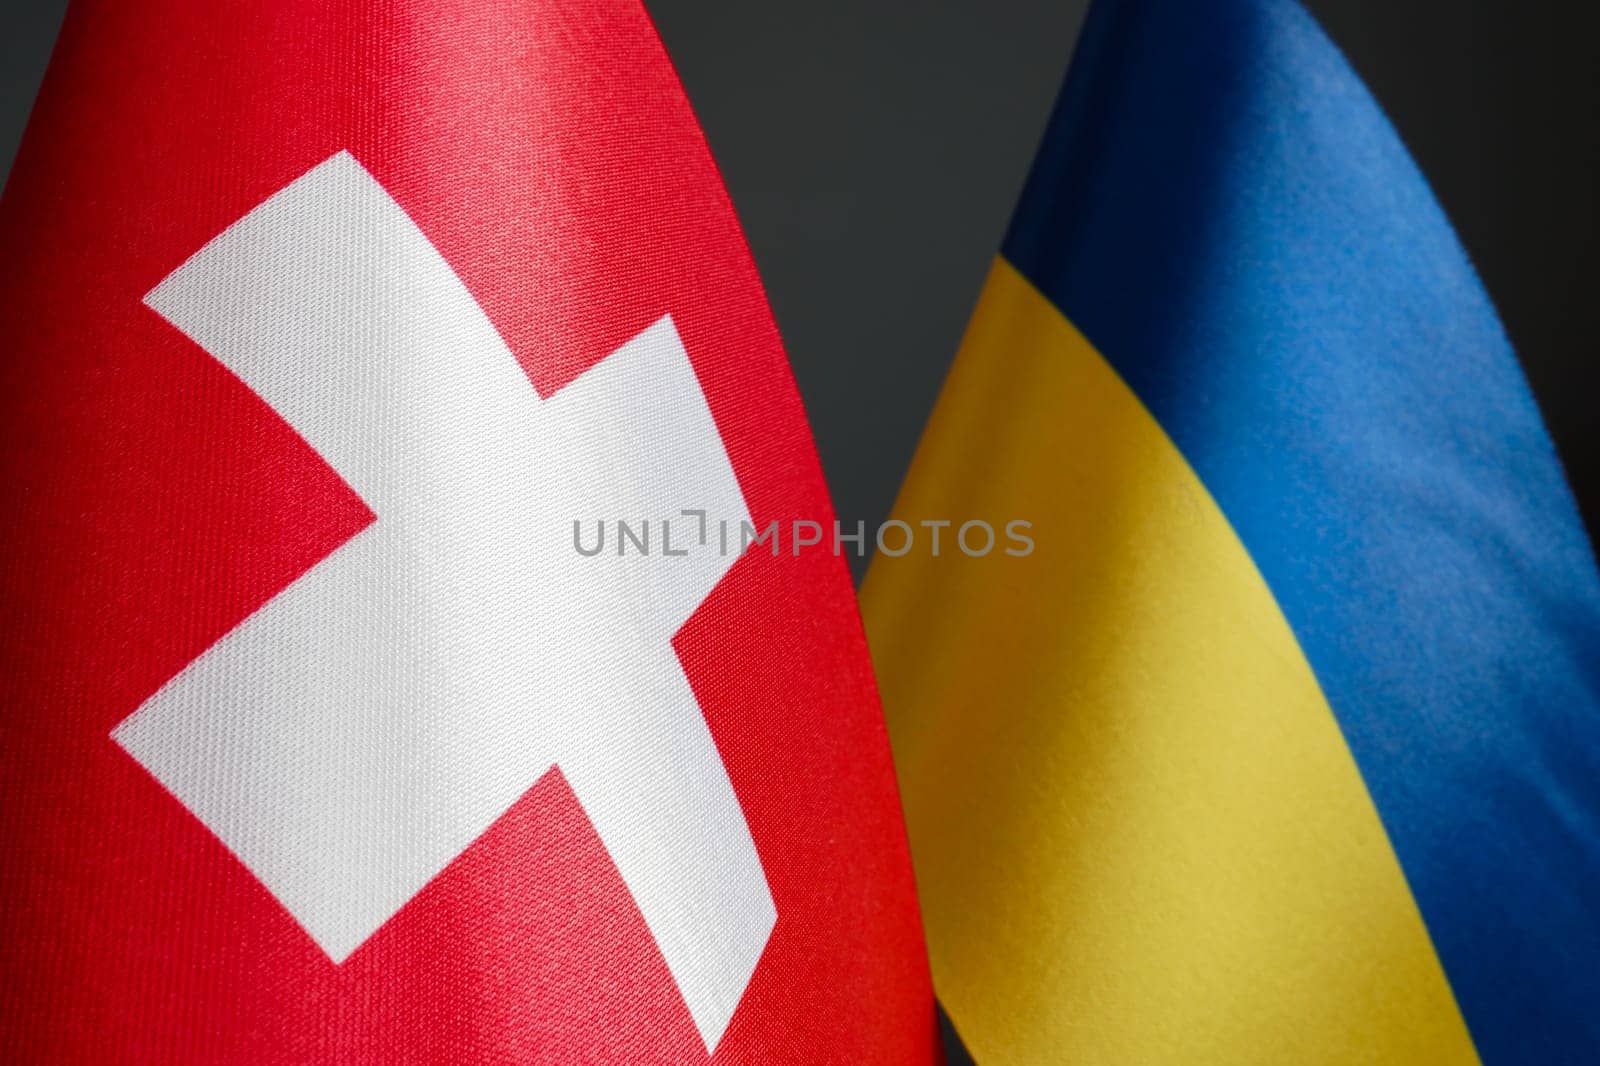 Nearby are flags of Switzerland and Ukraine.